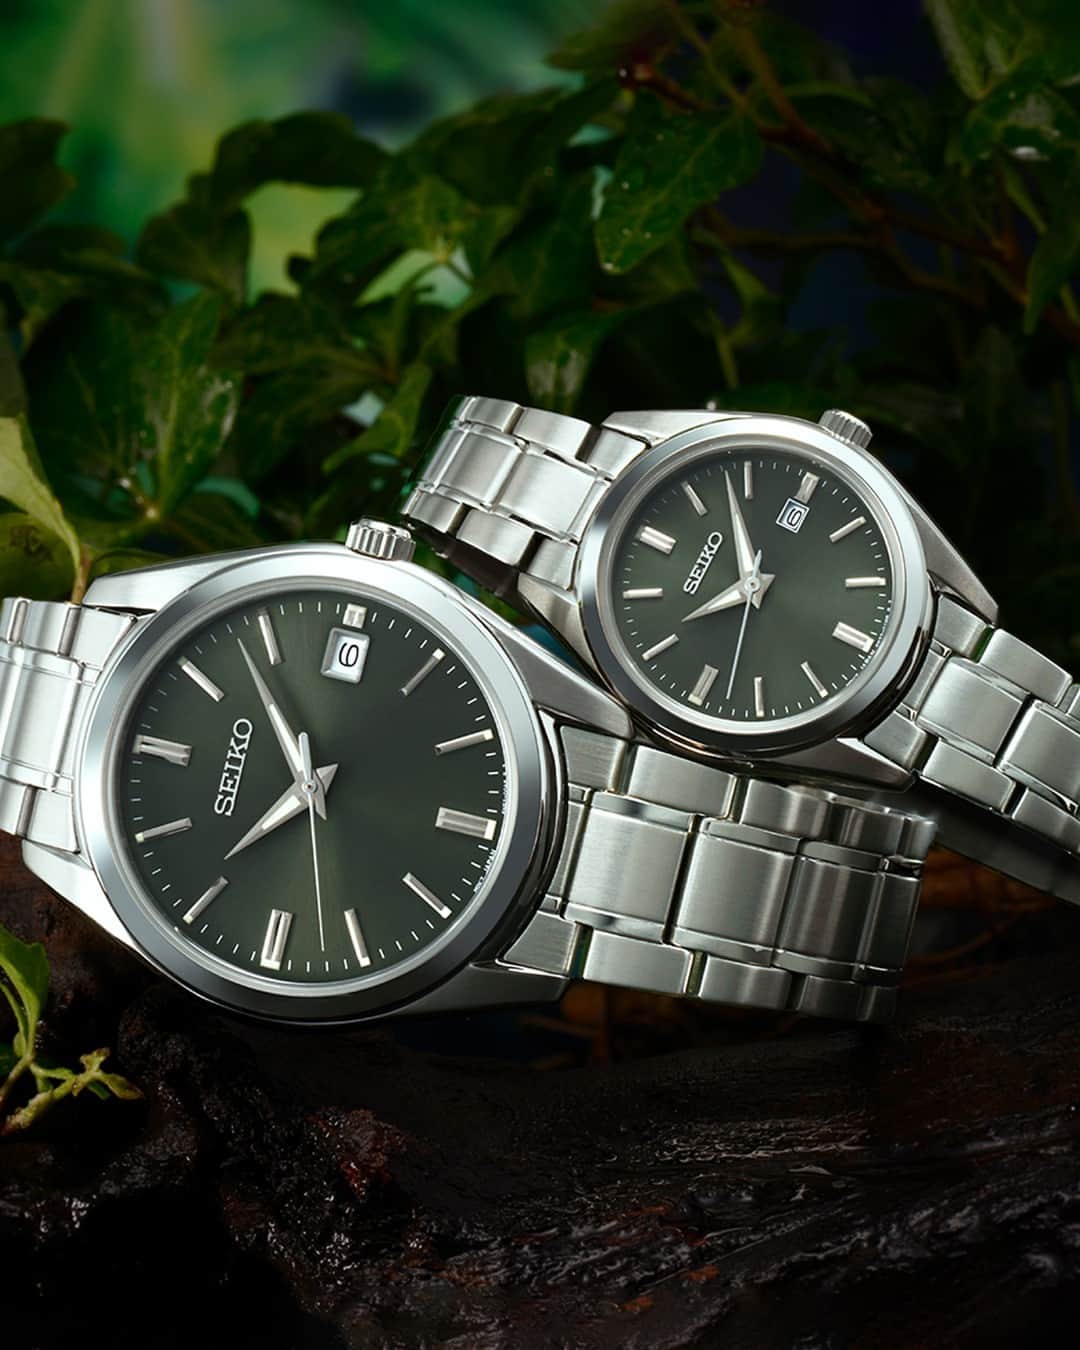 Seiko Watchesのインスタグラム：「We're Thinking Two Is Better Than One 🍃 - Fall is on the way, and greens are a staple for the season! #SUR527 & #SUR533 crisply display their olive green sunray dials inspired by the depth of the forest. In two different-sized cases, this duo is crafted of stainless steel with a streamlined case and bracelet design  to close summer with a sleek and fresh style.  #Seiko #SeikoEssentials」